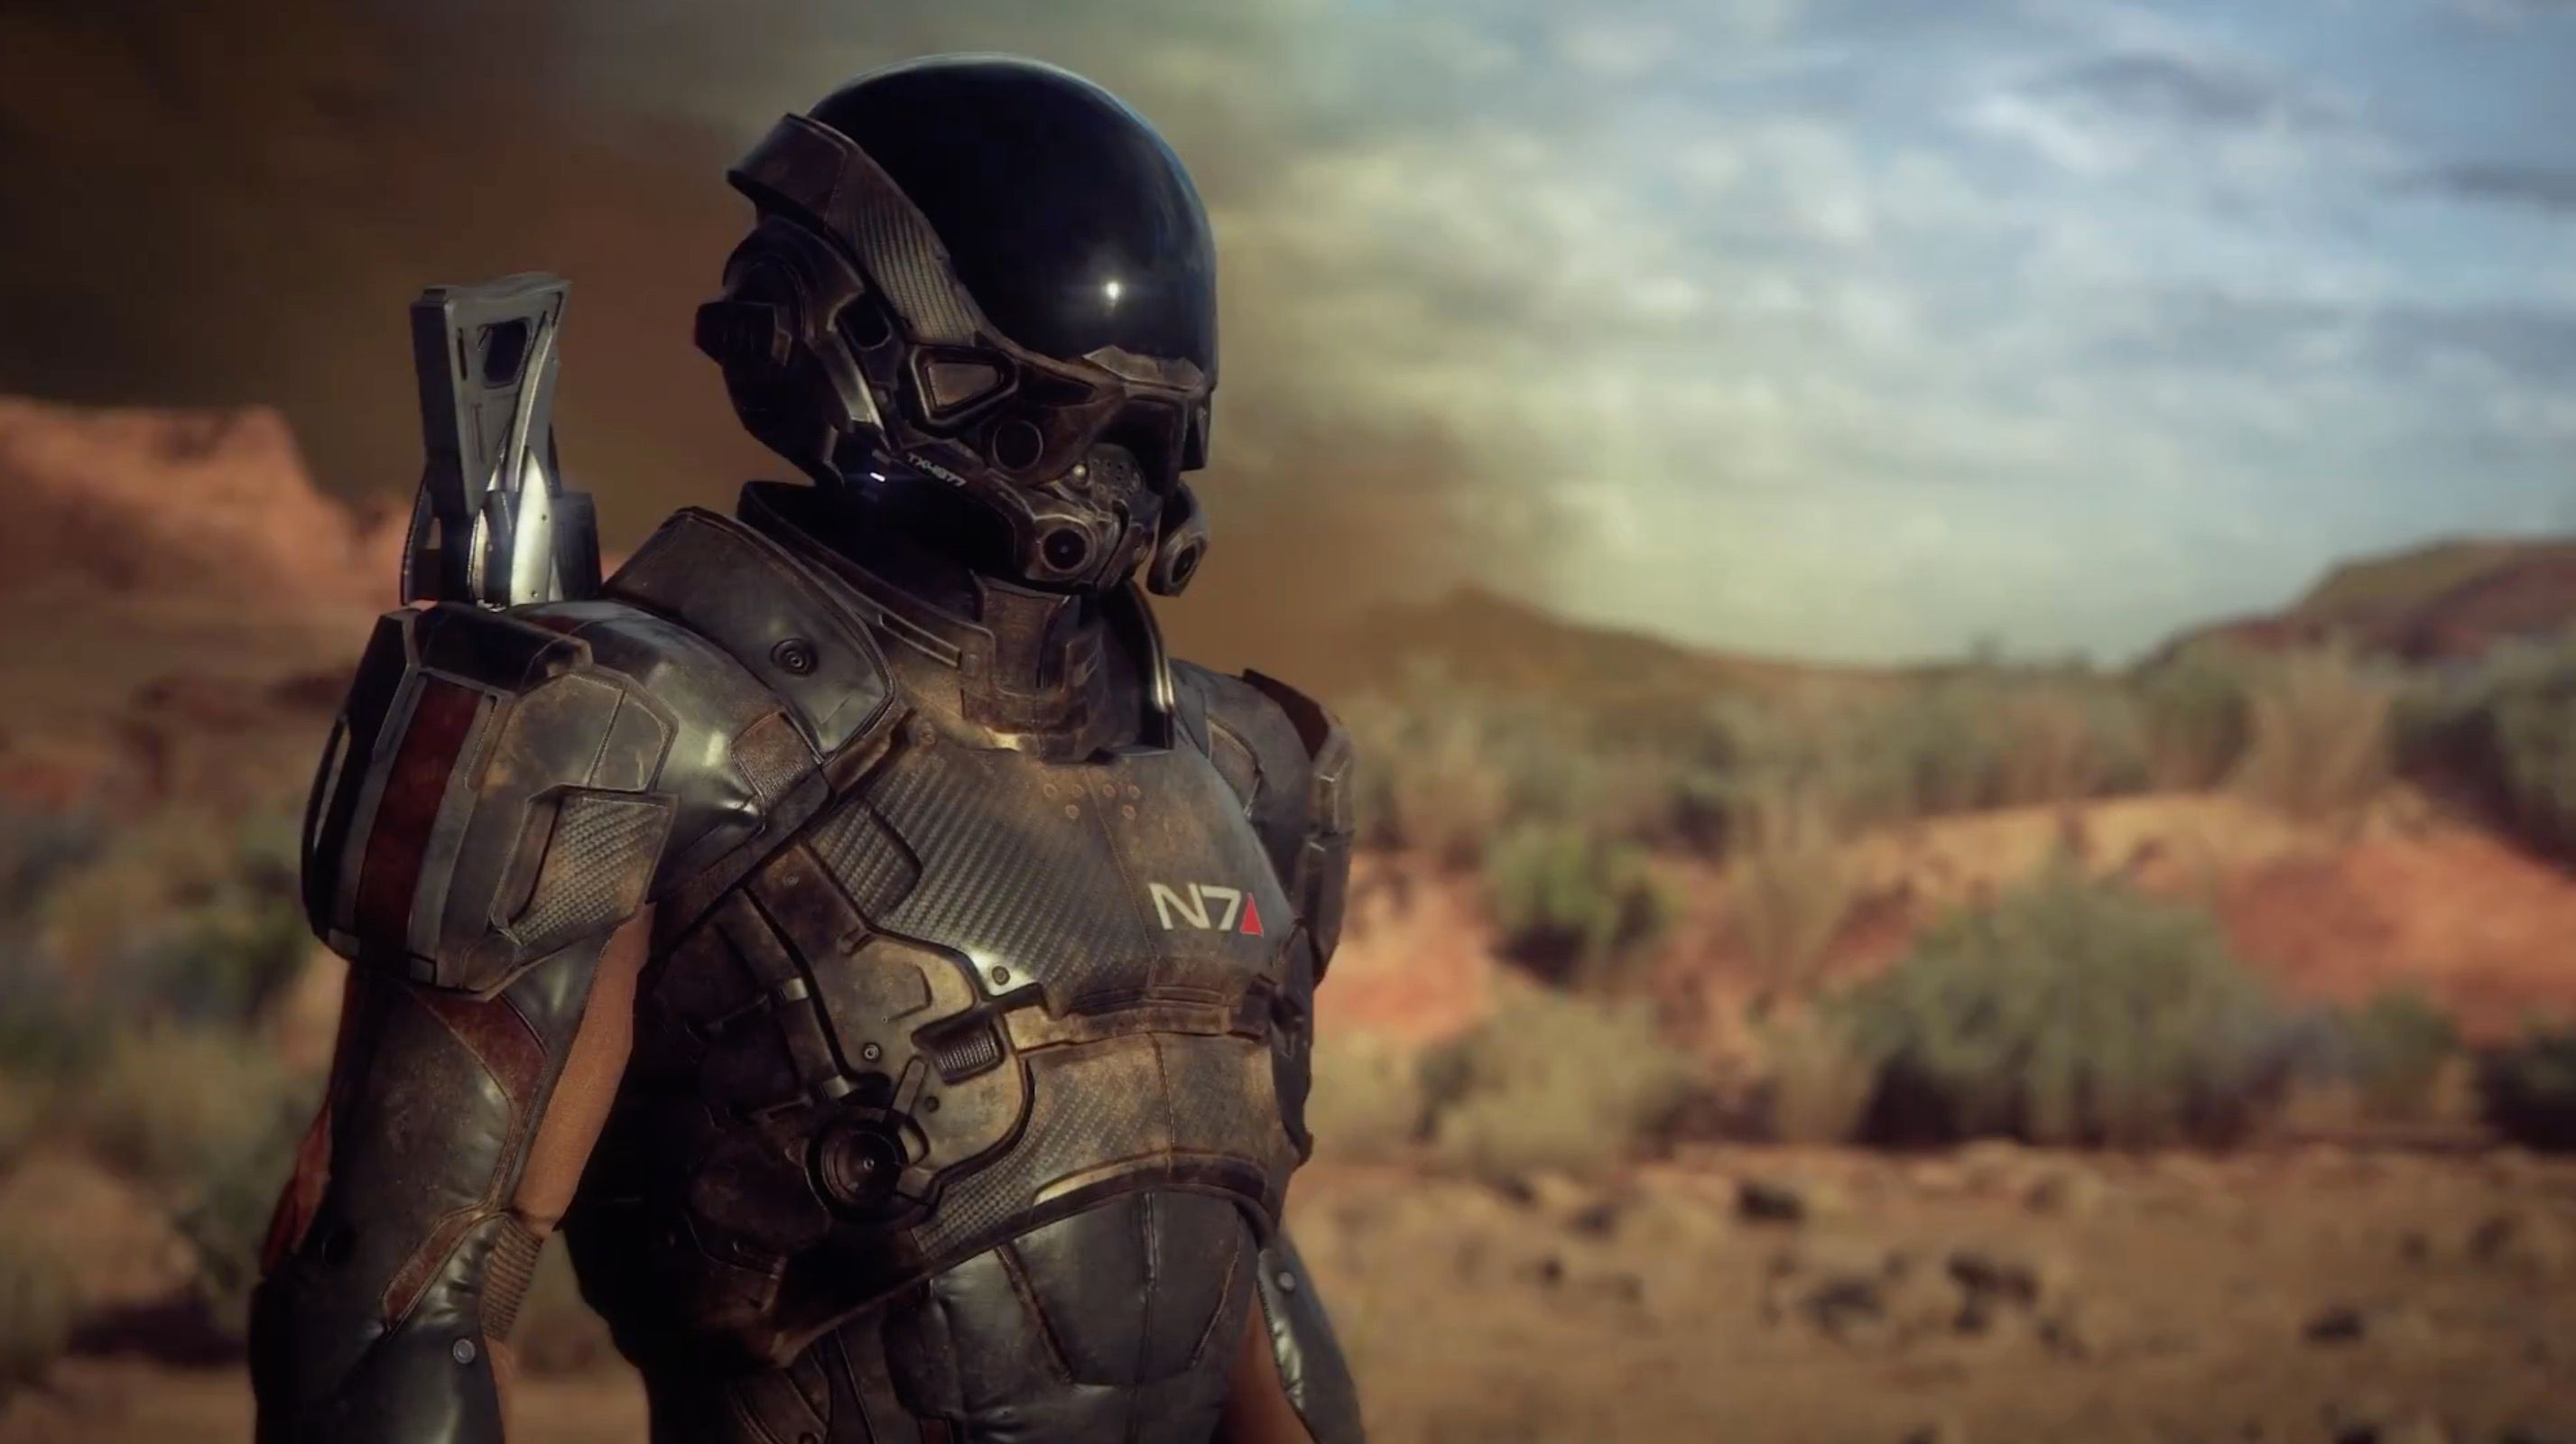 15 Awesome Things You Didn't Know About Mass Effect